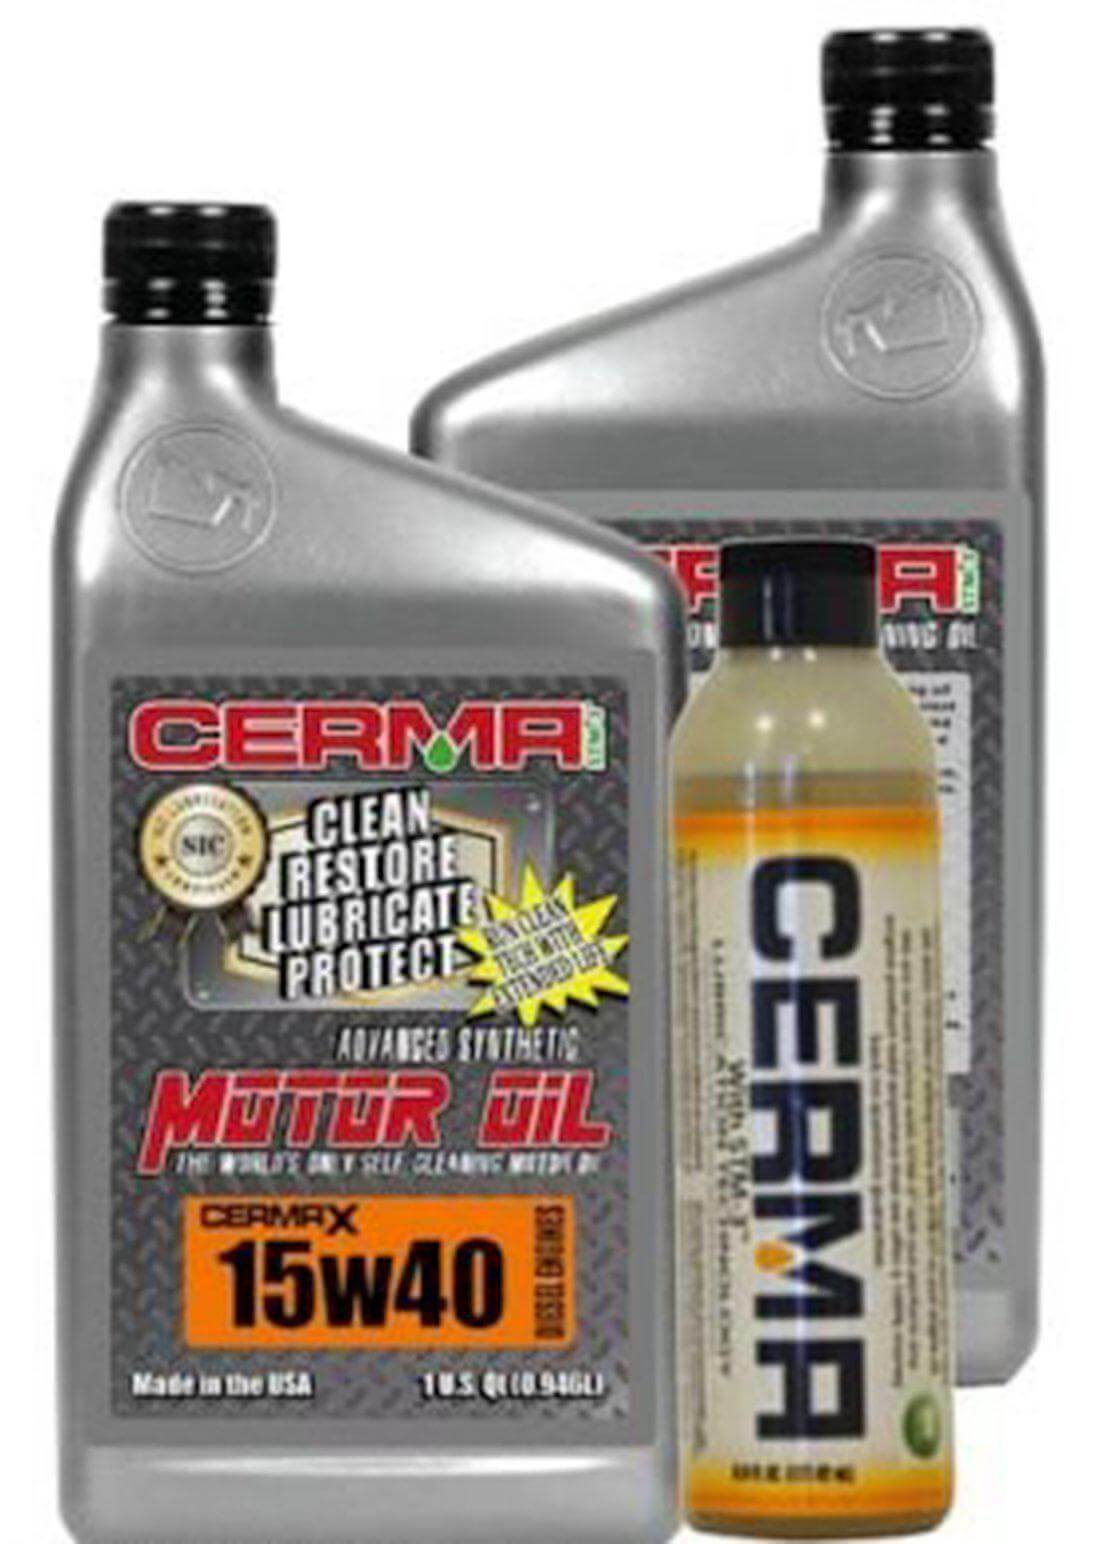 Cermax Diesel Ceramic Synthetic Oil Value Package for Pick Up Truck at $311.85 only from cermatreatment.com